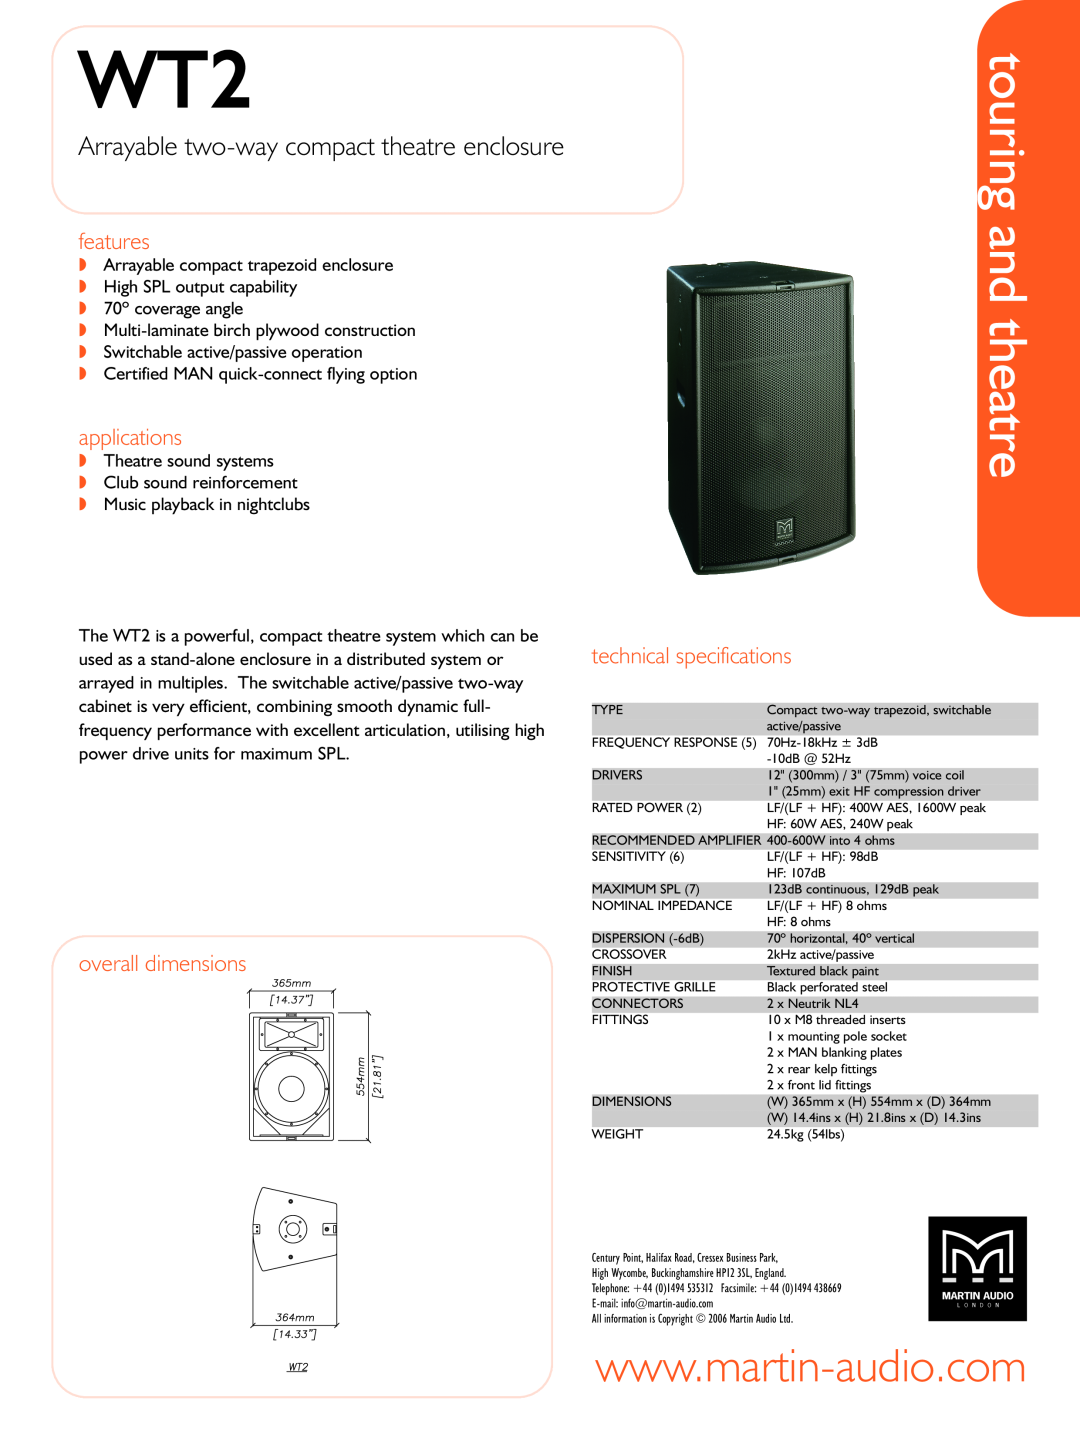 Martin Audio WWTT22 technical specifications Arrayable two-waycompact theatre enclosure, features, applications 